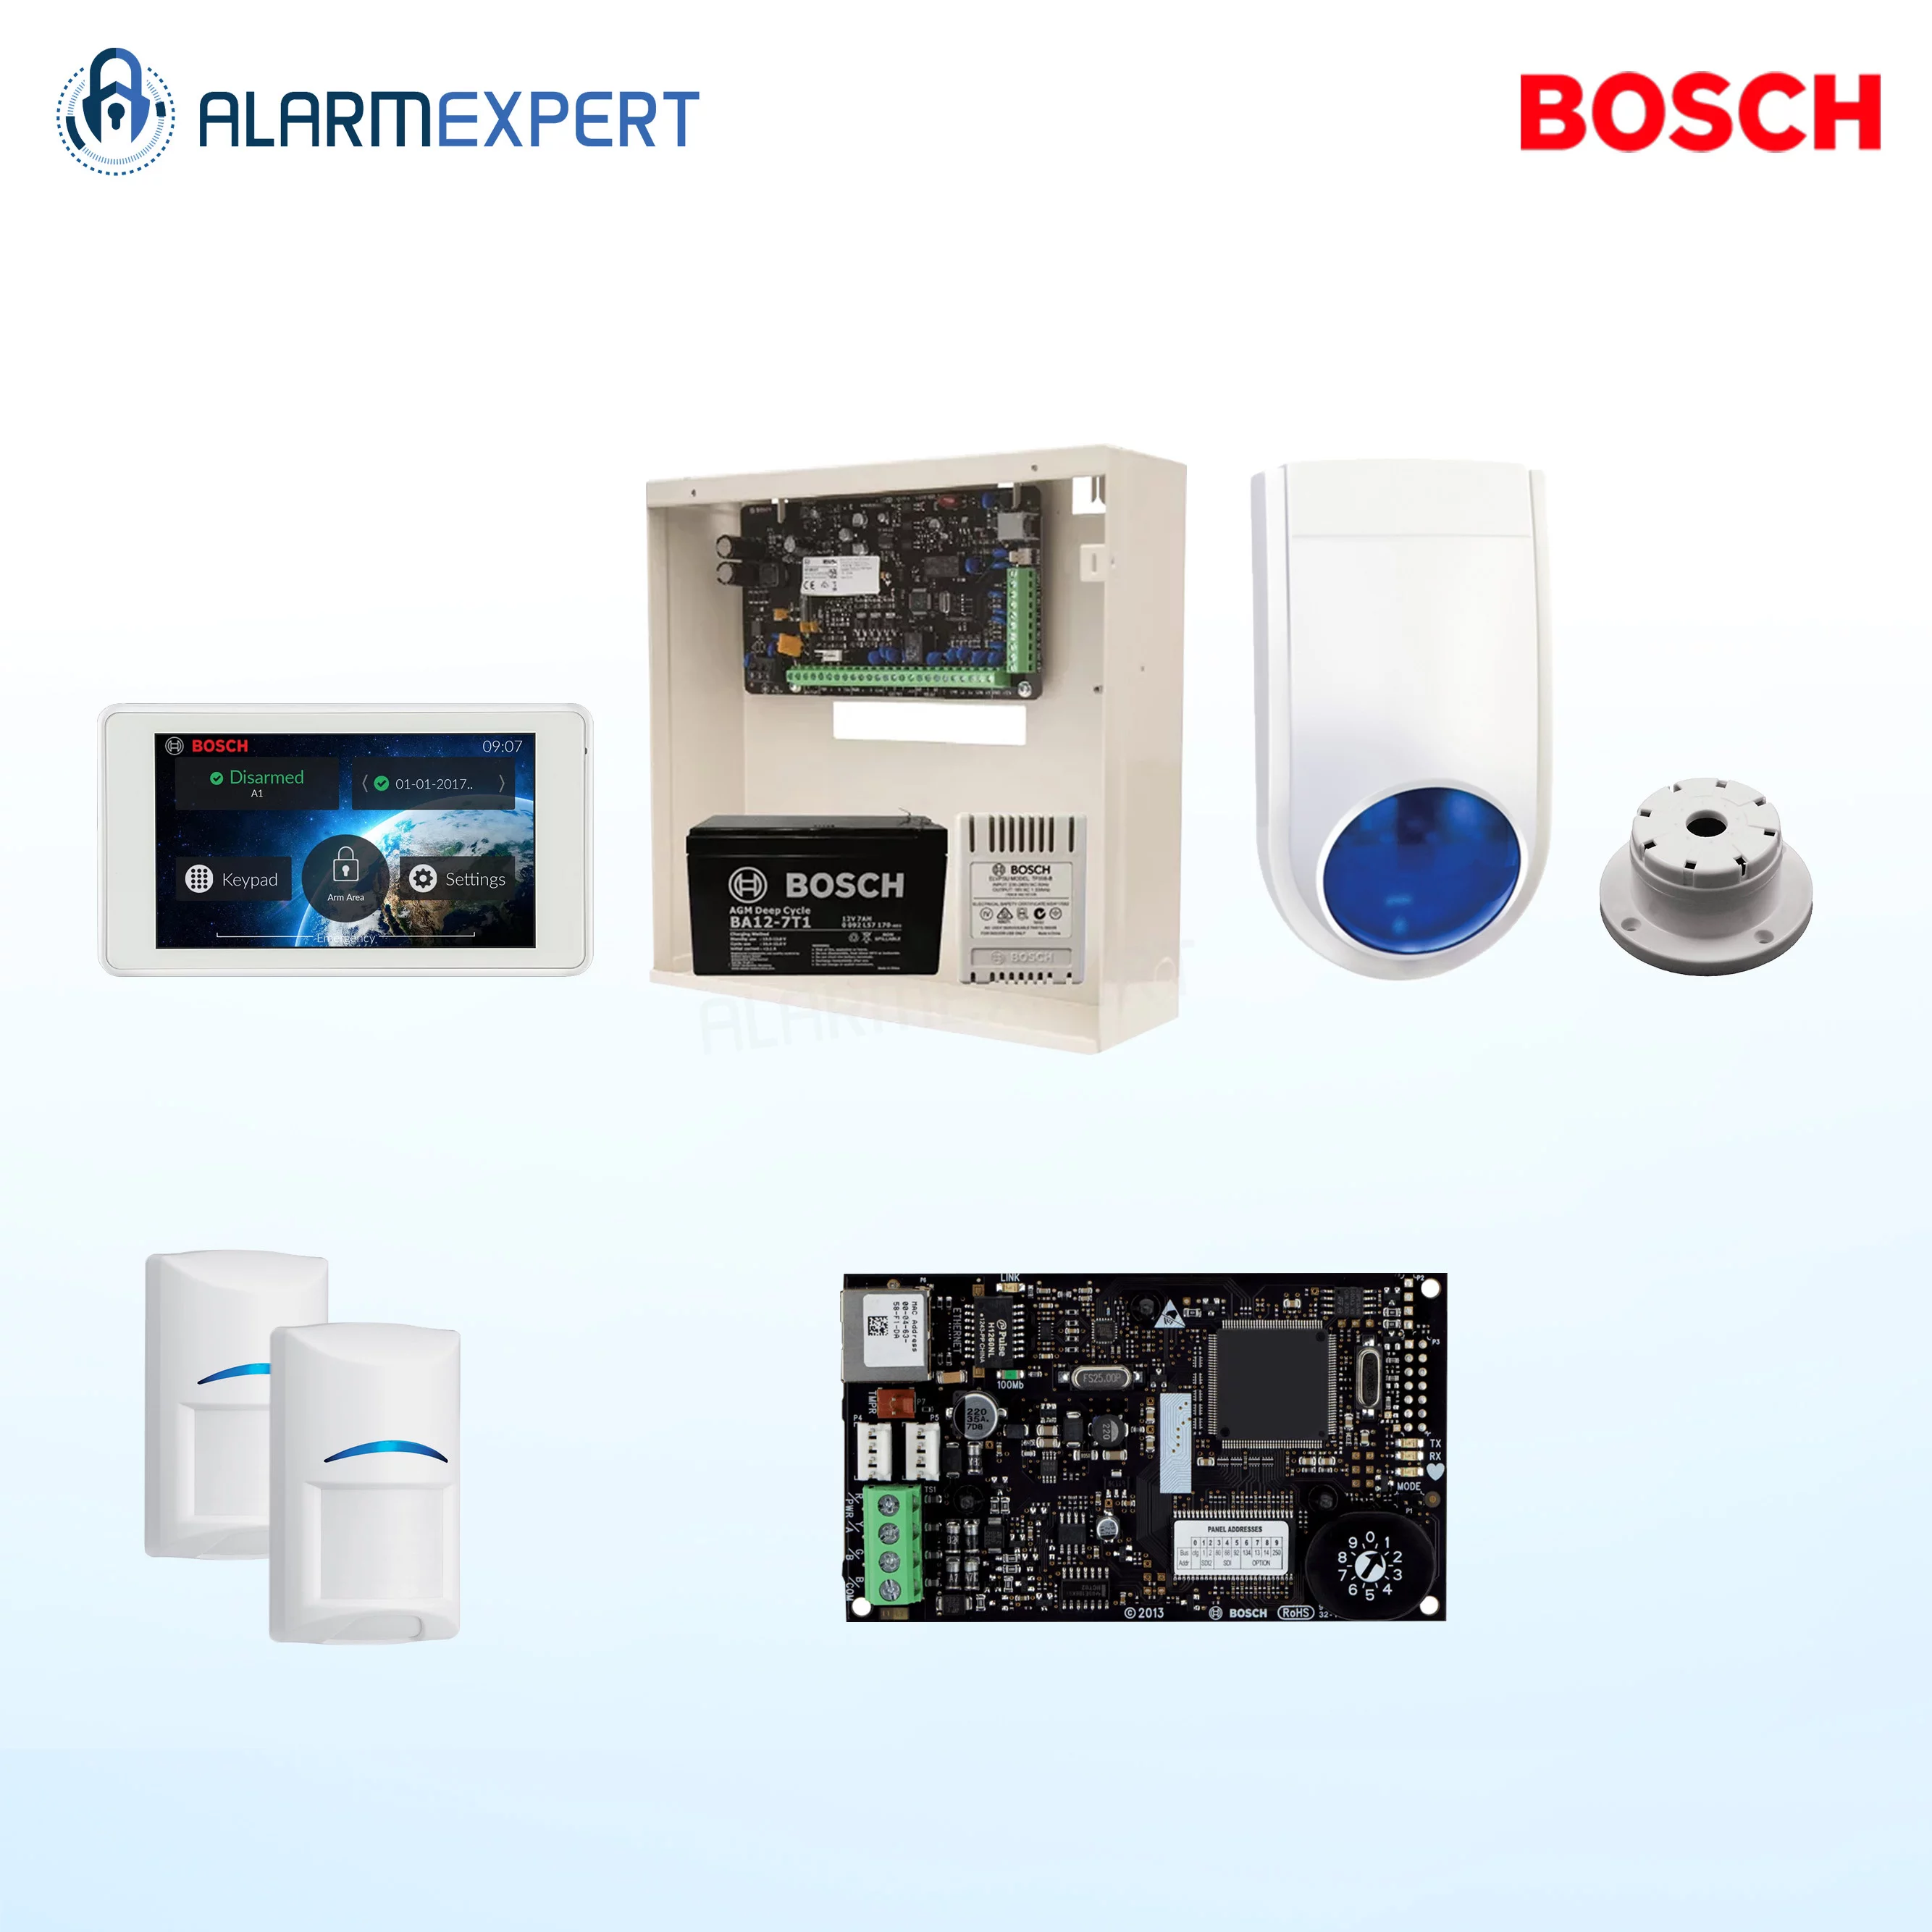 Bosch Solution 2000 IP + 2 QUADs + 5" Touch screen Keypad